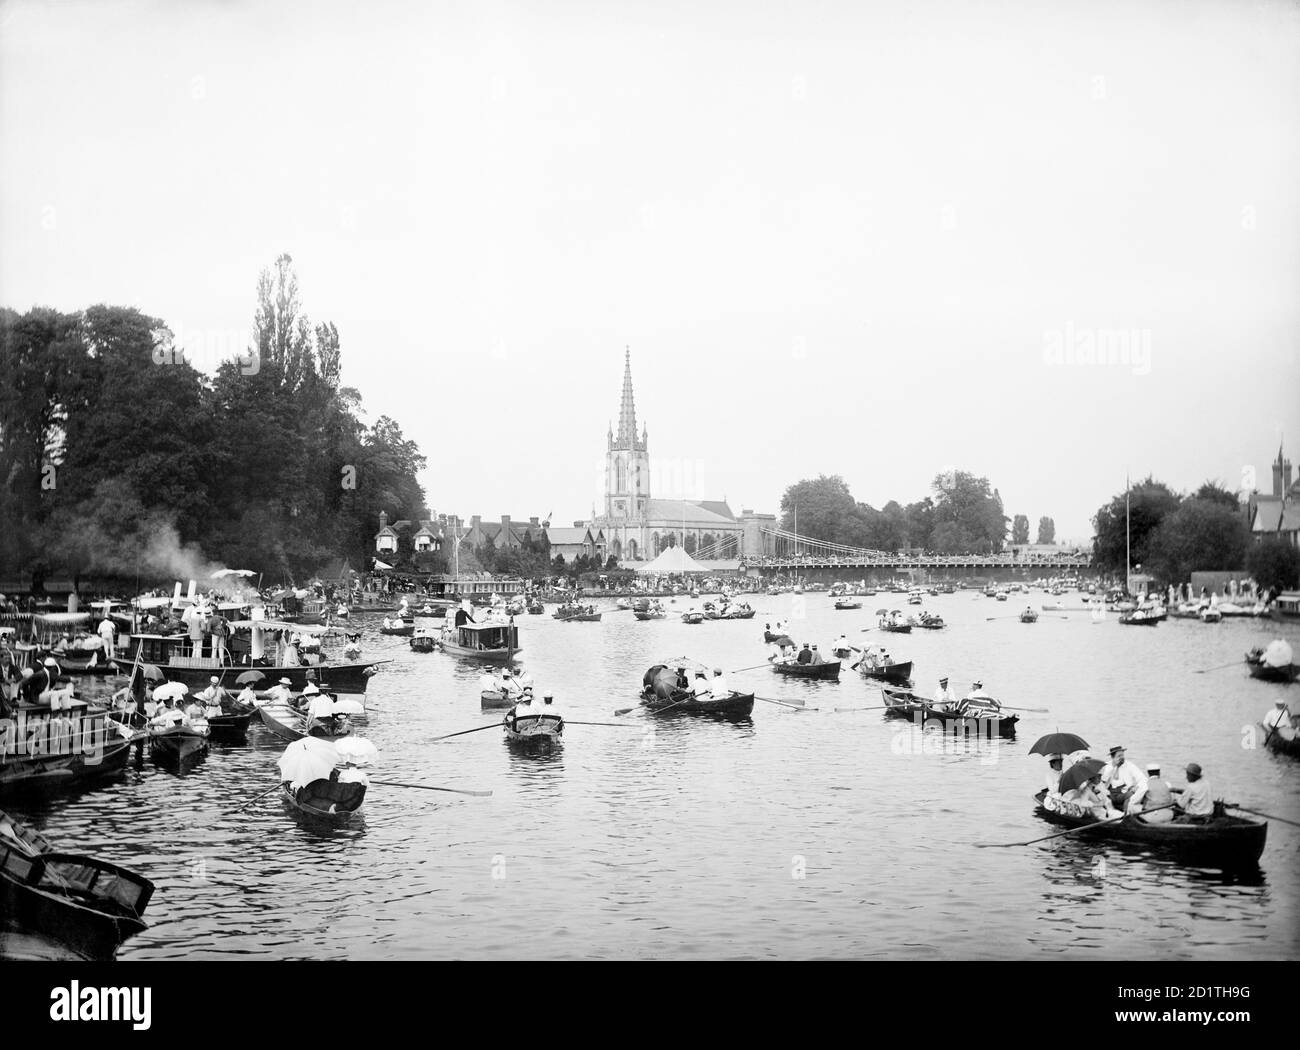 MARLOW, Wycombe, Buckinghamshire. A view of the river filled with small row boats and houseboats during the regatta held annually between at least 1855 and 2001 on the River Thames (it has since transferred to Dorney Lake). With All Saints Church and the suspension bridge beyond. Photographed in 1885 by Henry Taunt. Stock Photo